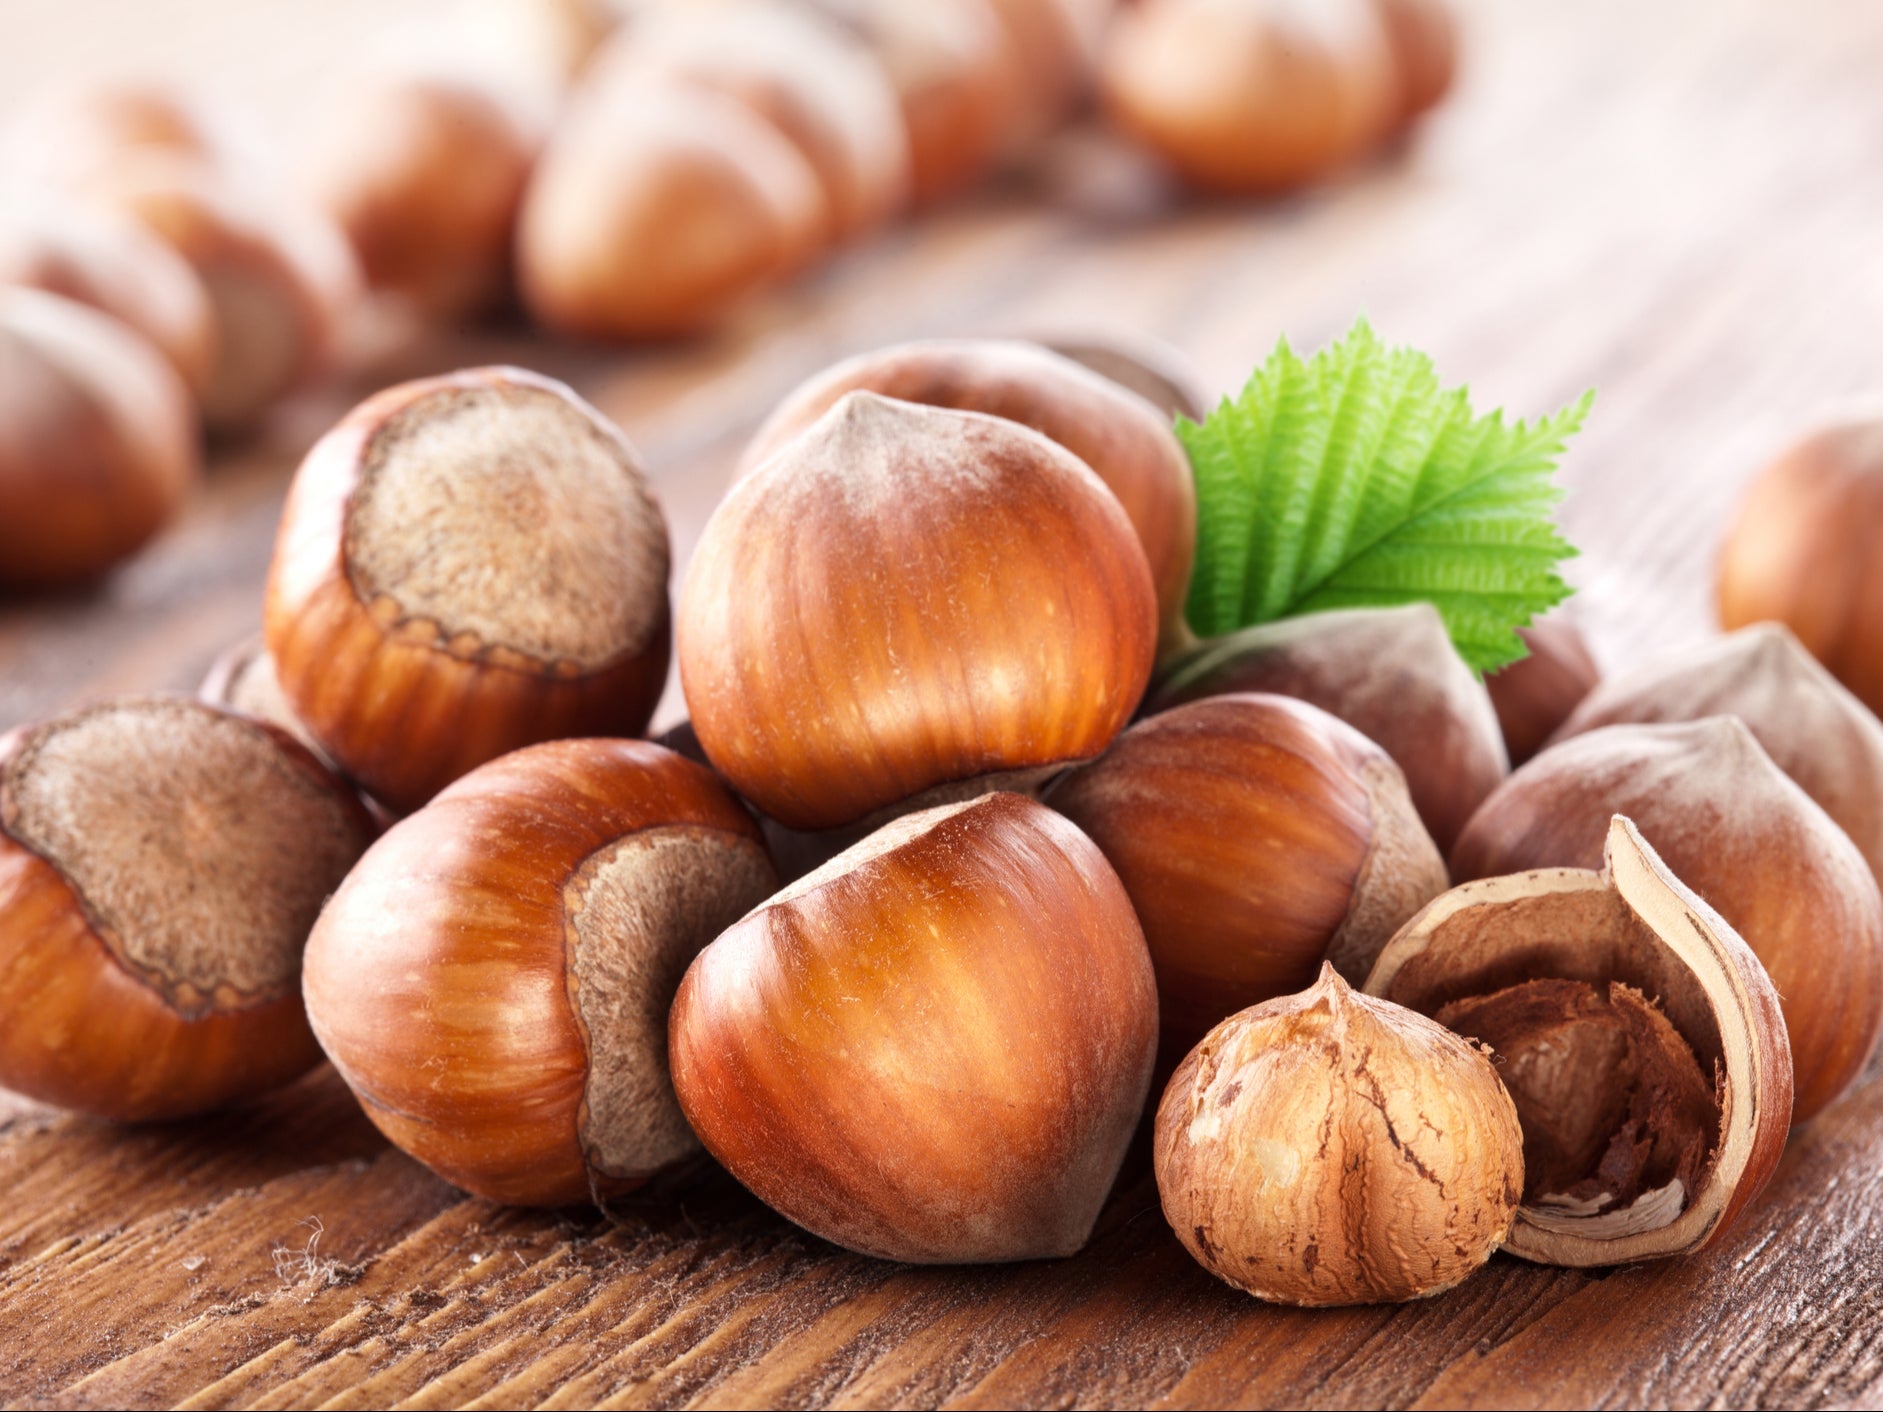 Could hazelnuts provide us with new low-carbon biofuels?